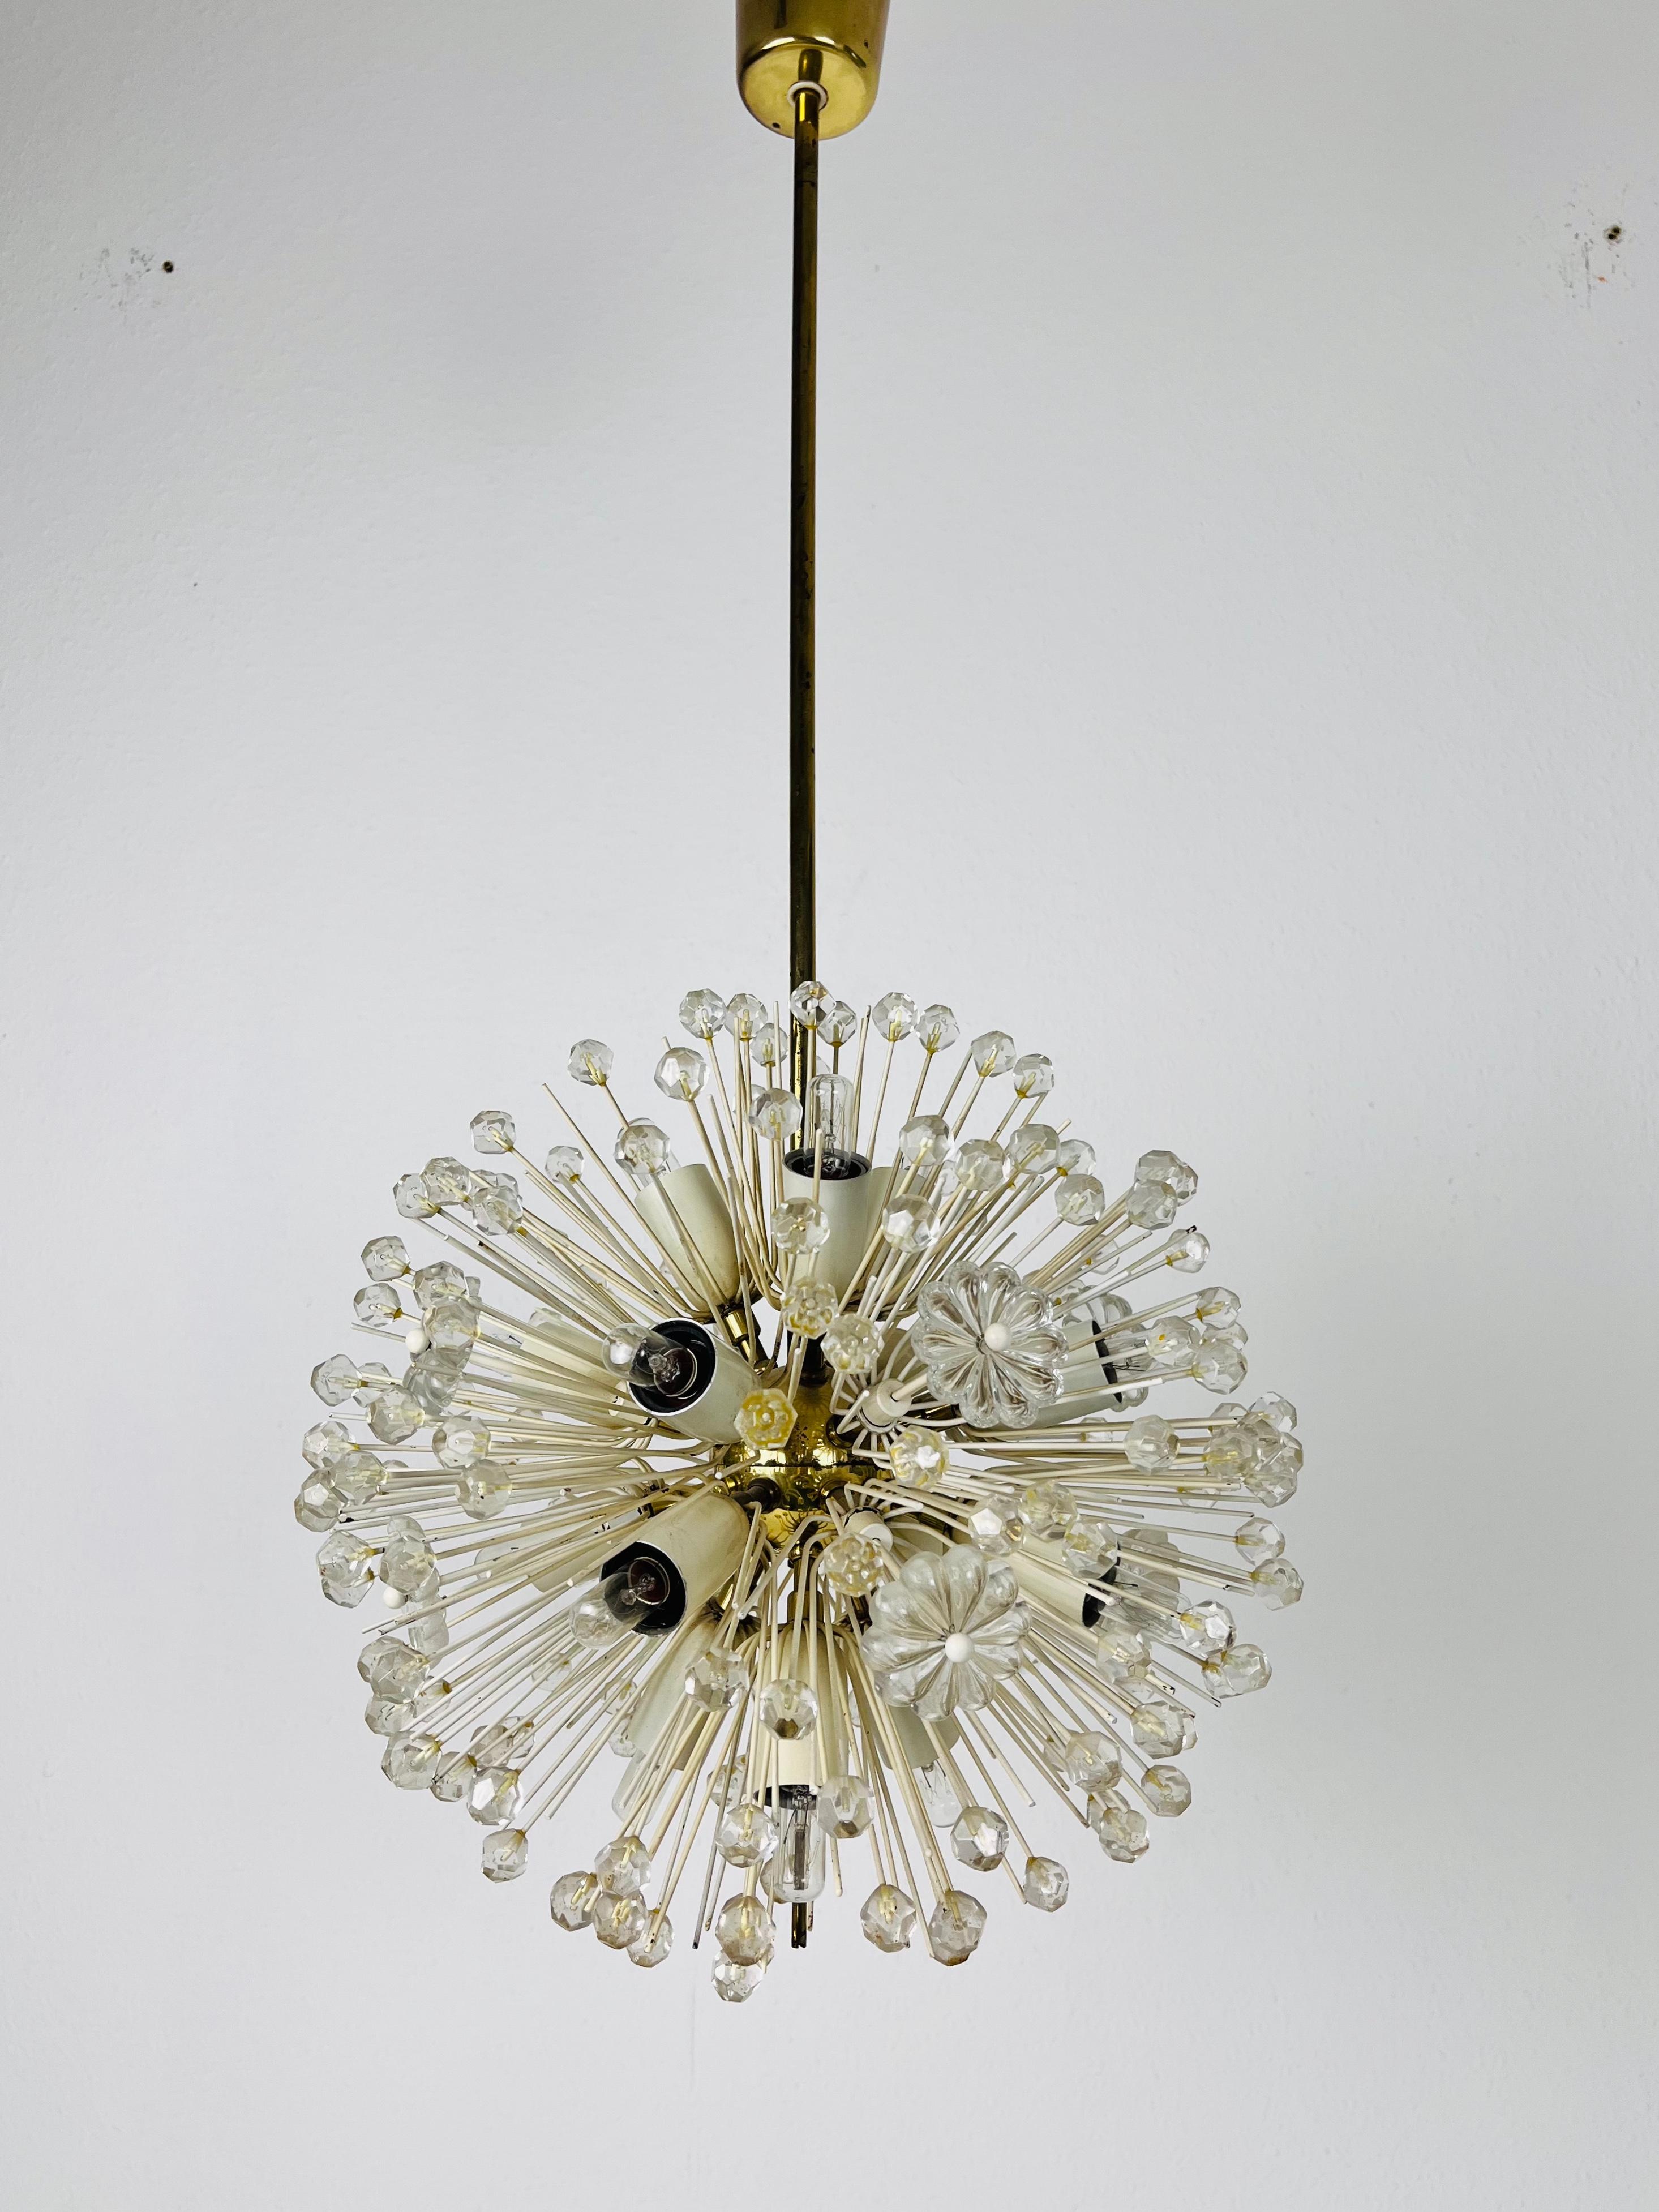 A beautiful chandelier made by Emil Stejnar for Rupert Nikoll, Austria in the 1960s. The lighting has an amazing midcentury design. It is made of brass and small glasses. The fixture has a very nice Hollywood Regency floral design.

The light